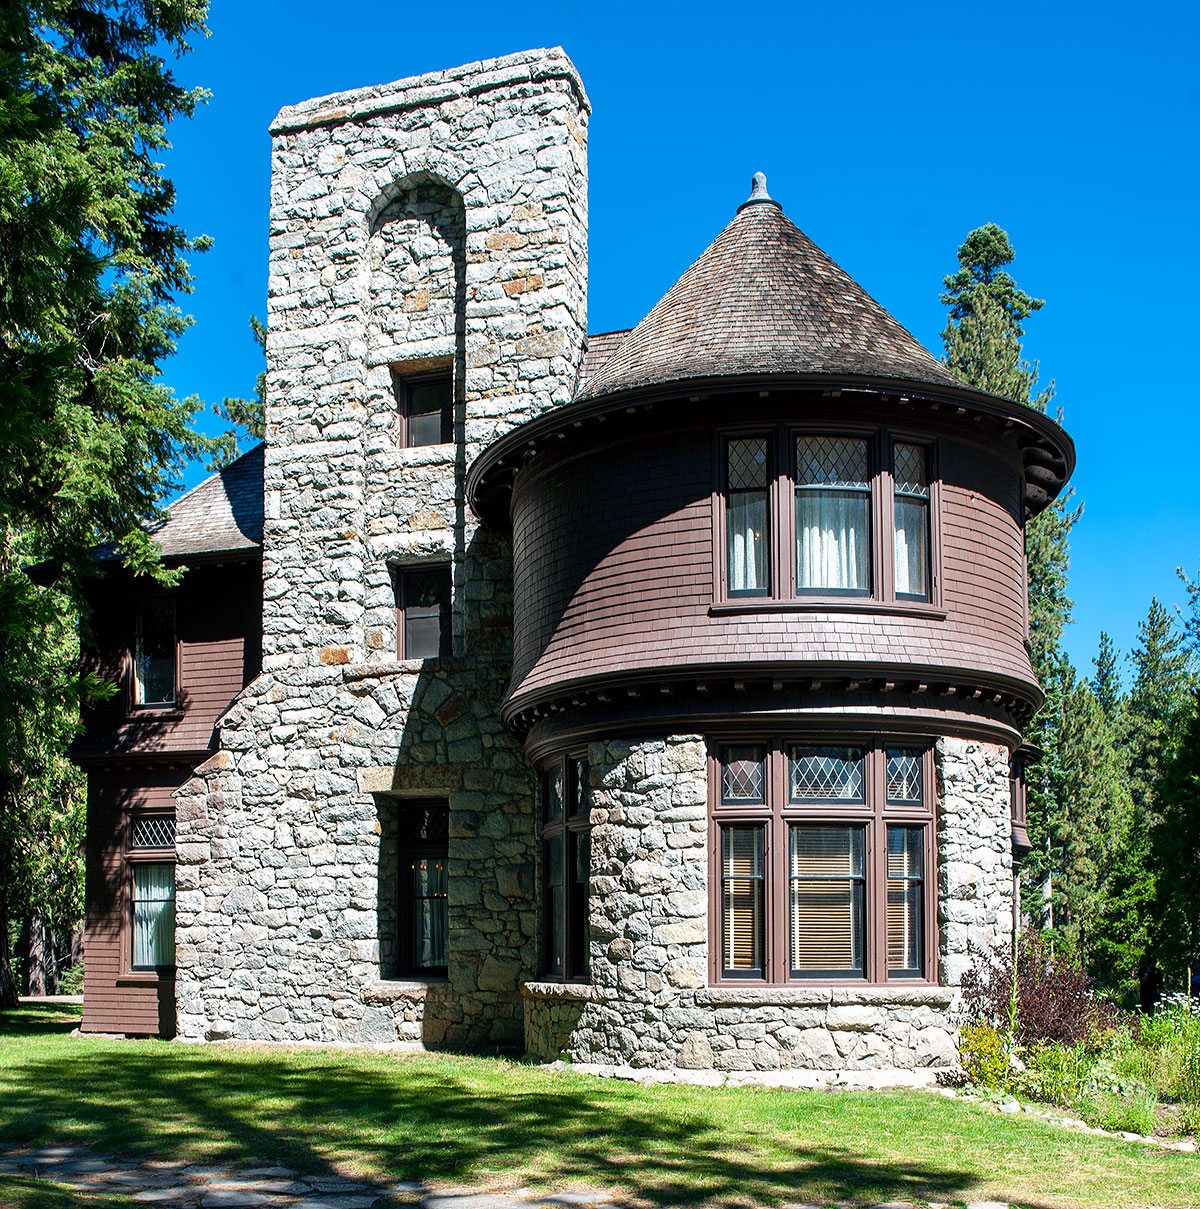 The Hellman-Ehrman Mansion on Lake Tahoe was designed by Bliss & Faville and built 1903.